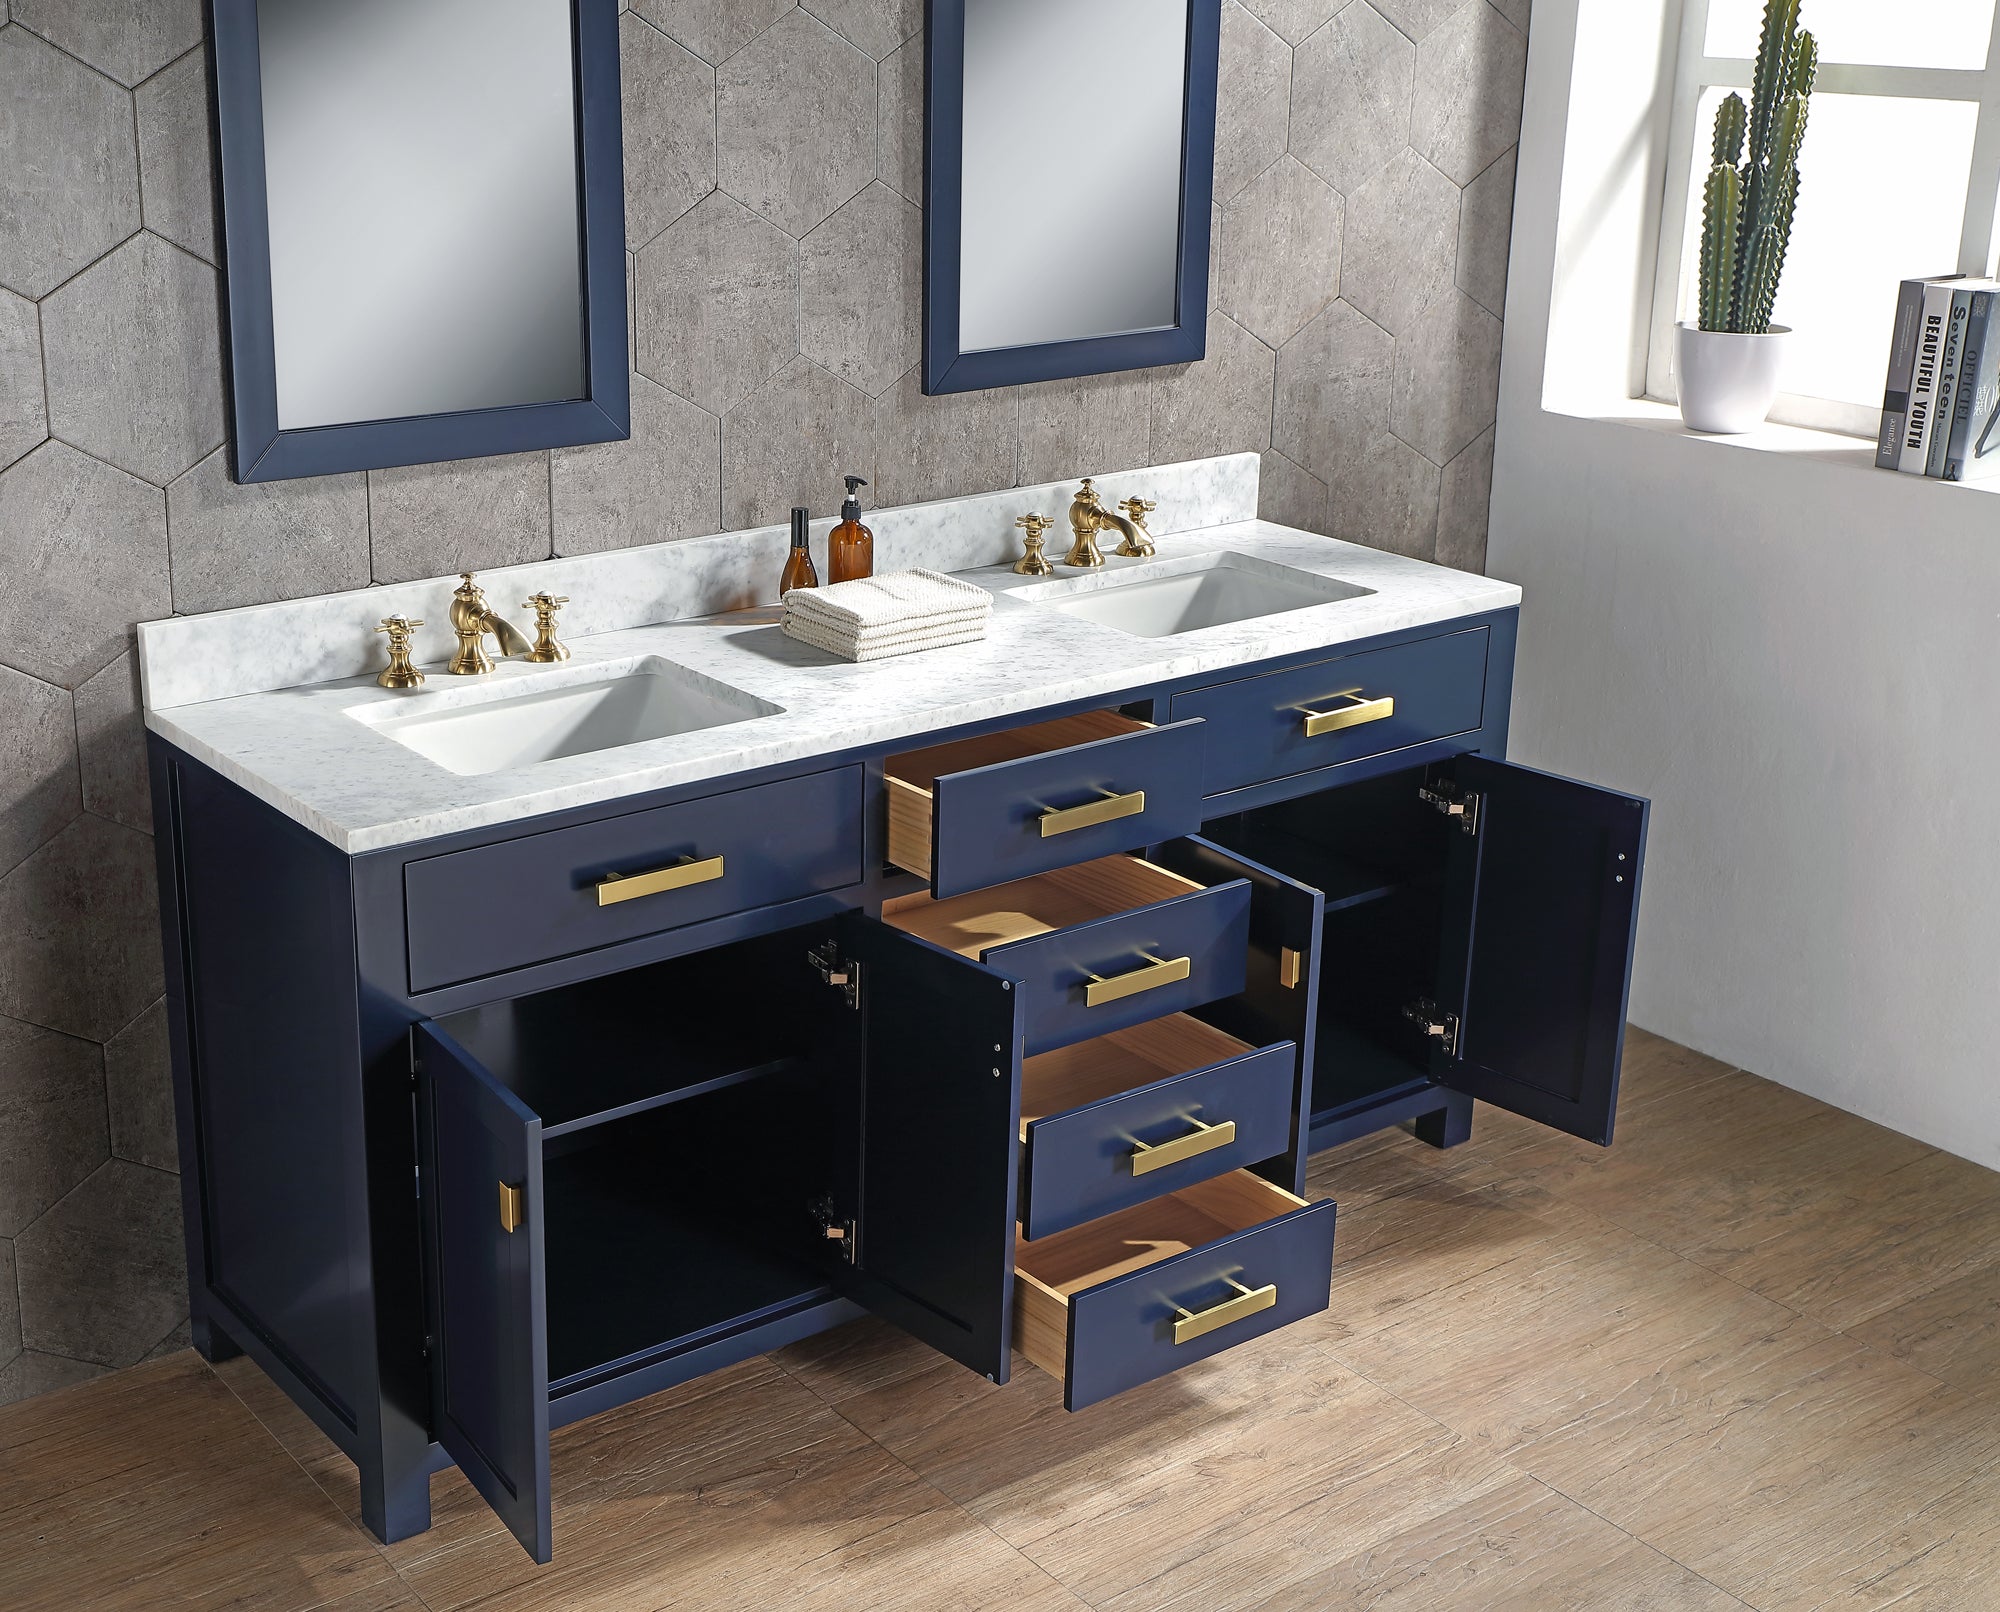 Water Creation | Madison 72-Inch Double Sink Carrara White Marble Vanity In Monarch Blue With Matching Mirror(s) and F2-0013-06-FX Lavatory Faucet(s) | MS72CW06MB-R21FX1306